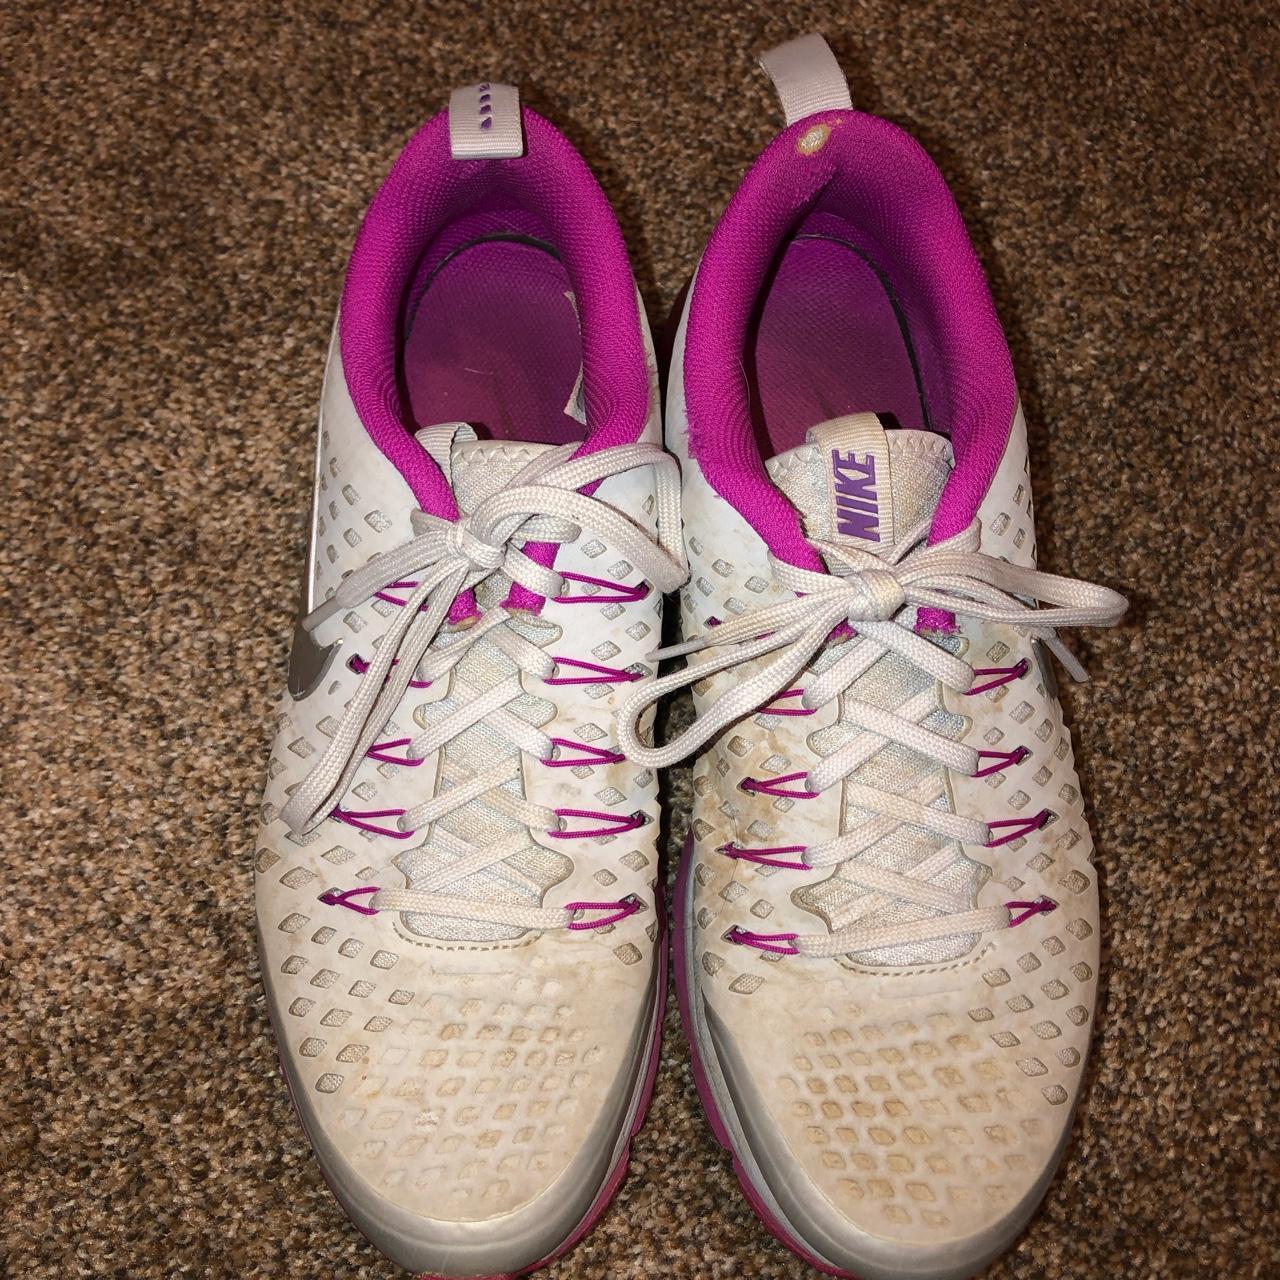 Nike Women's Pink and Silver Trainers